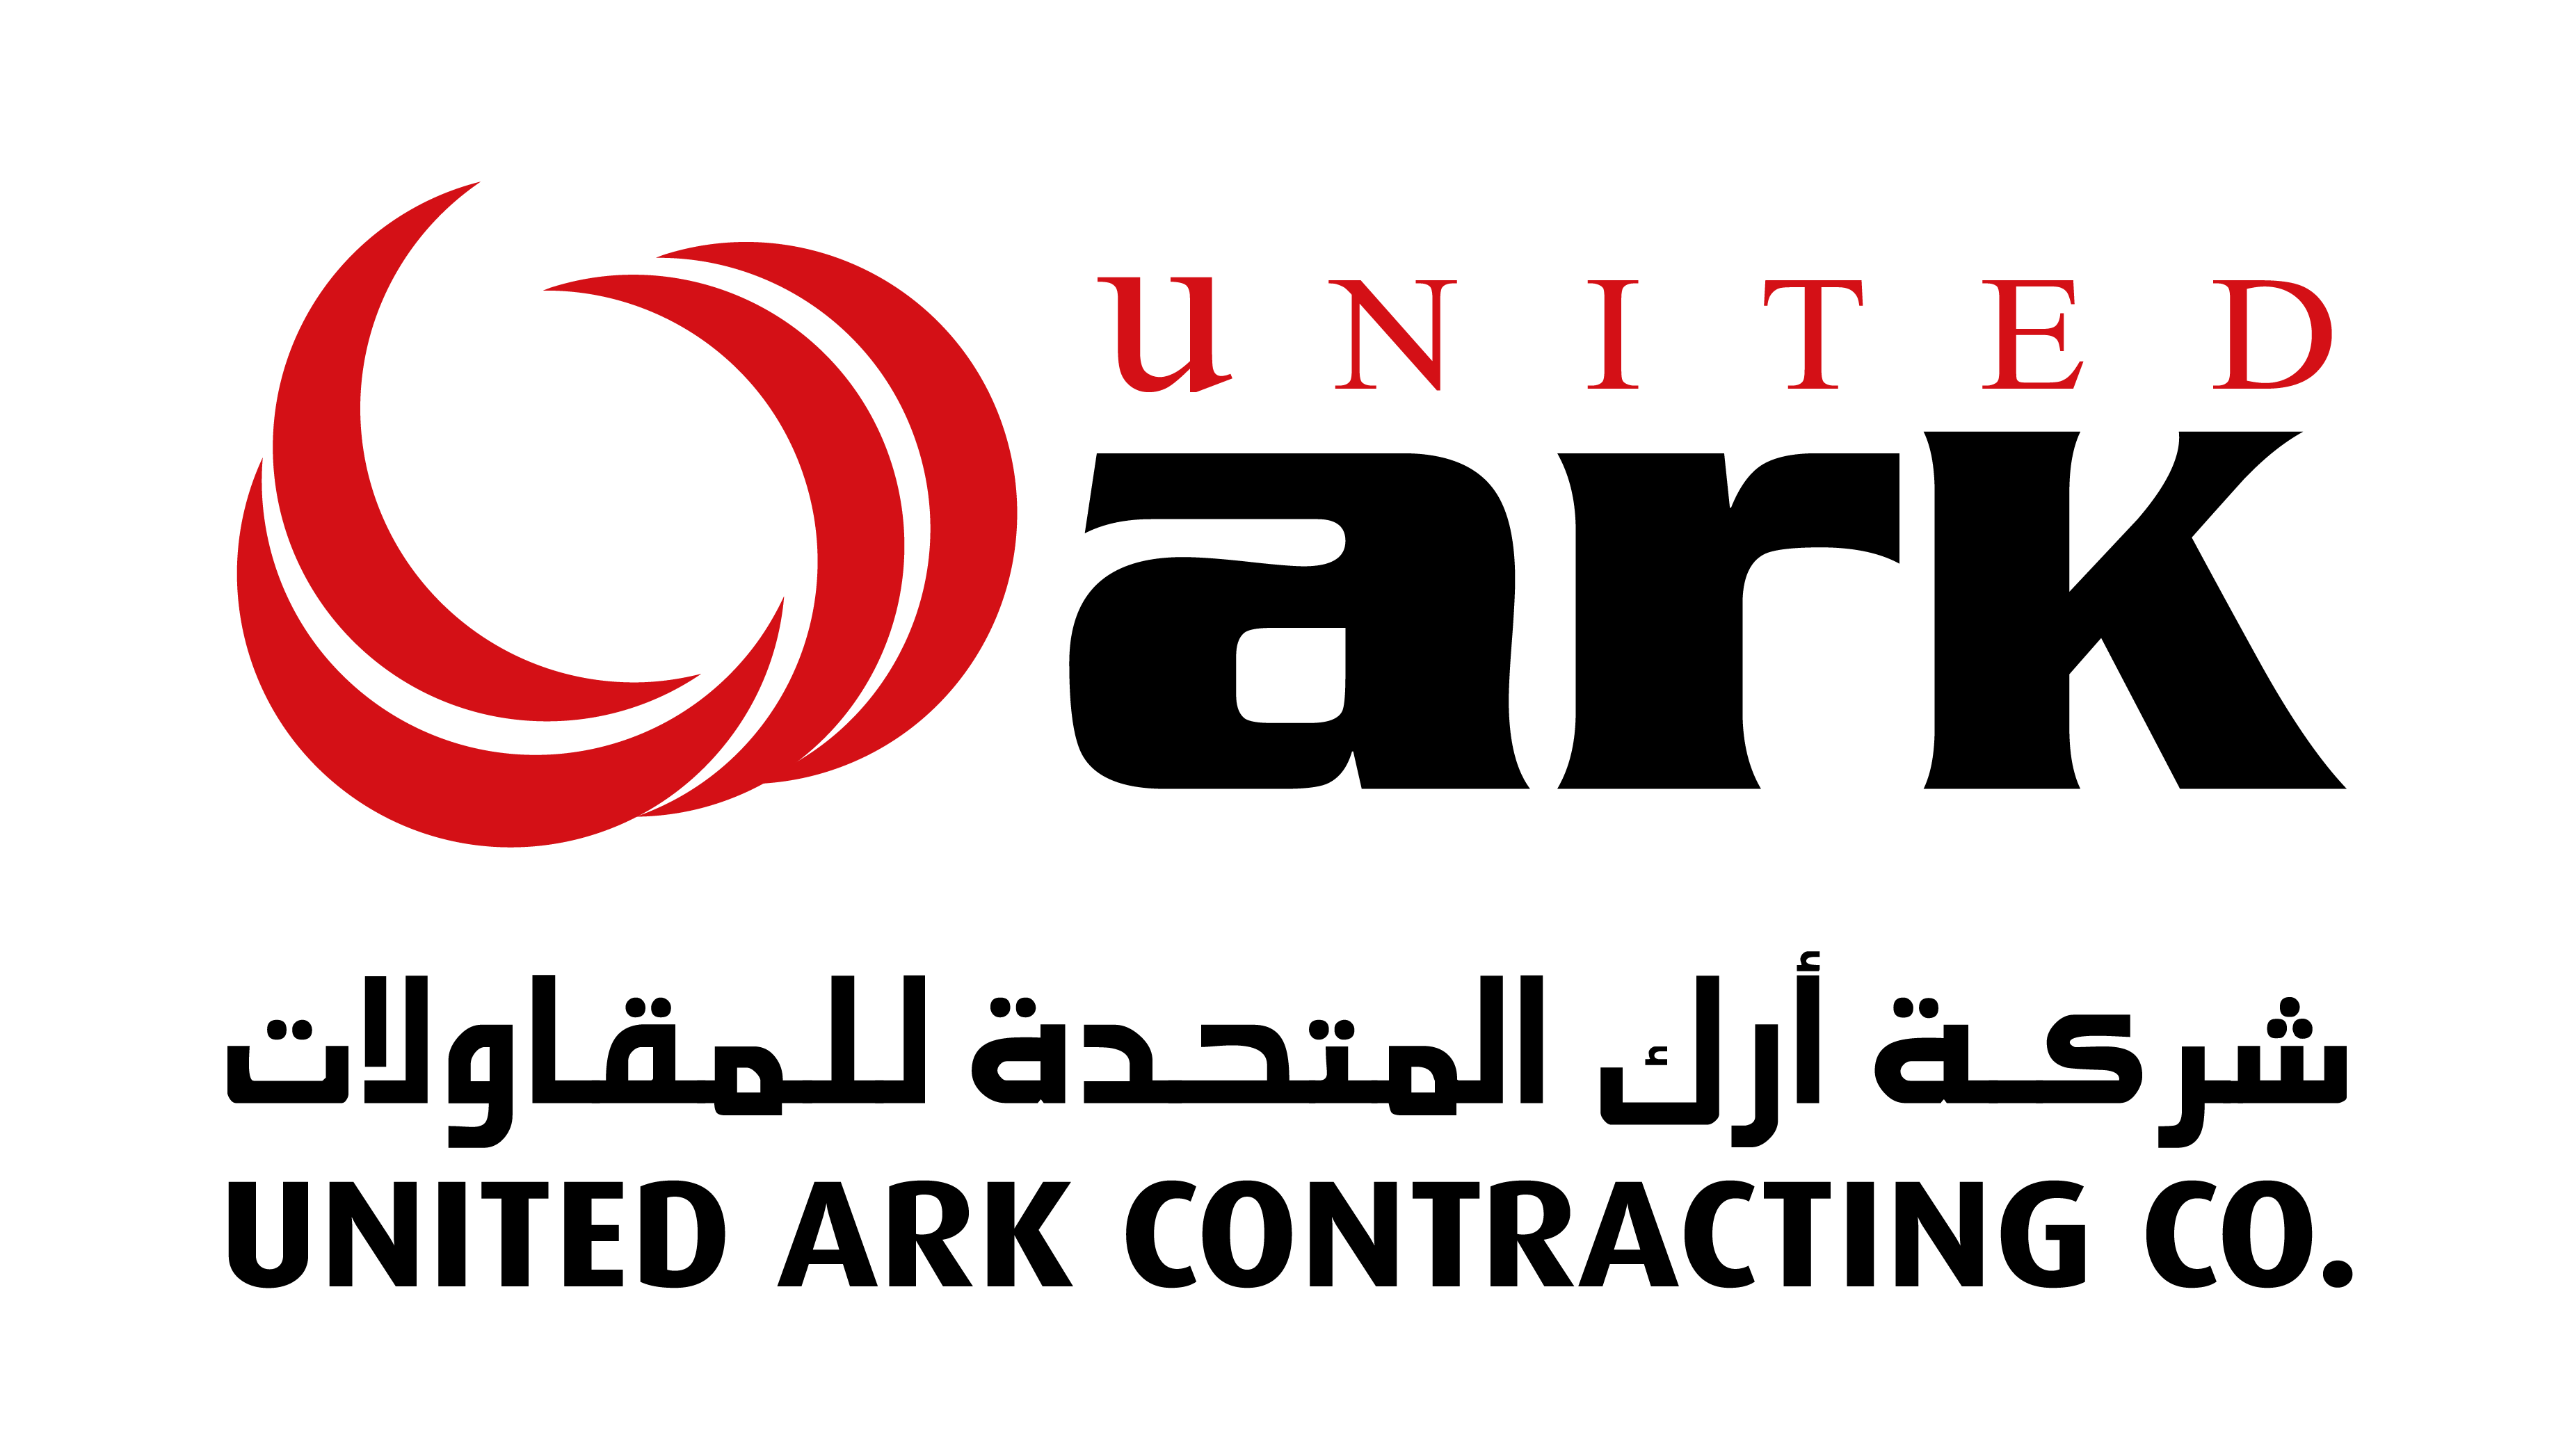 United Ark Contracting Co. Logo